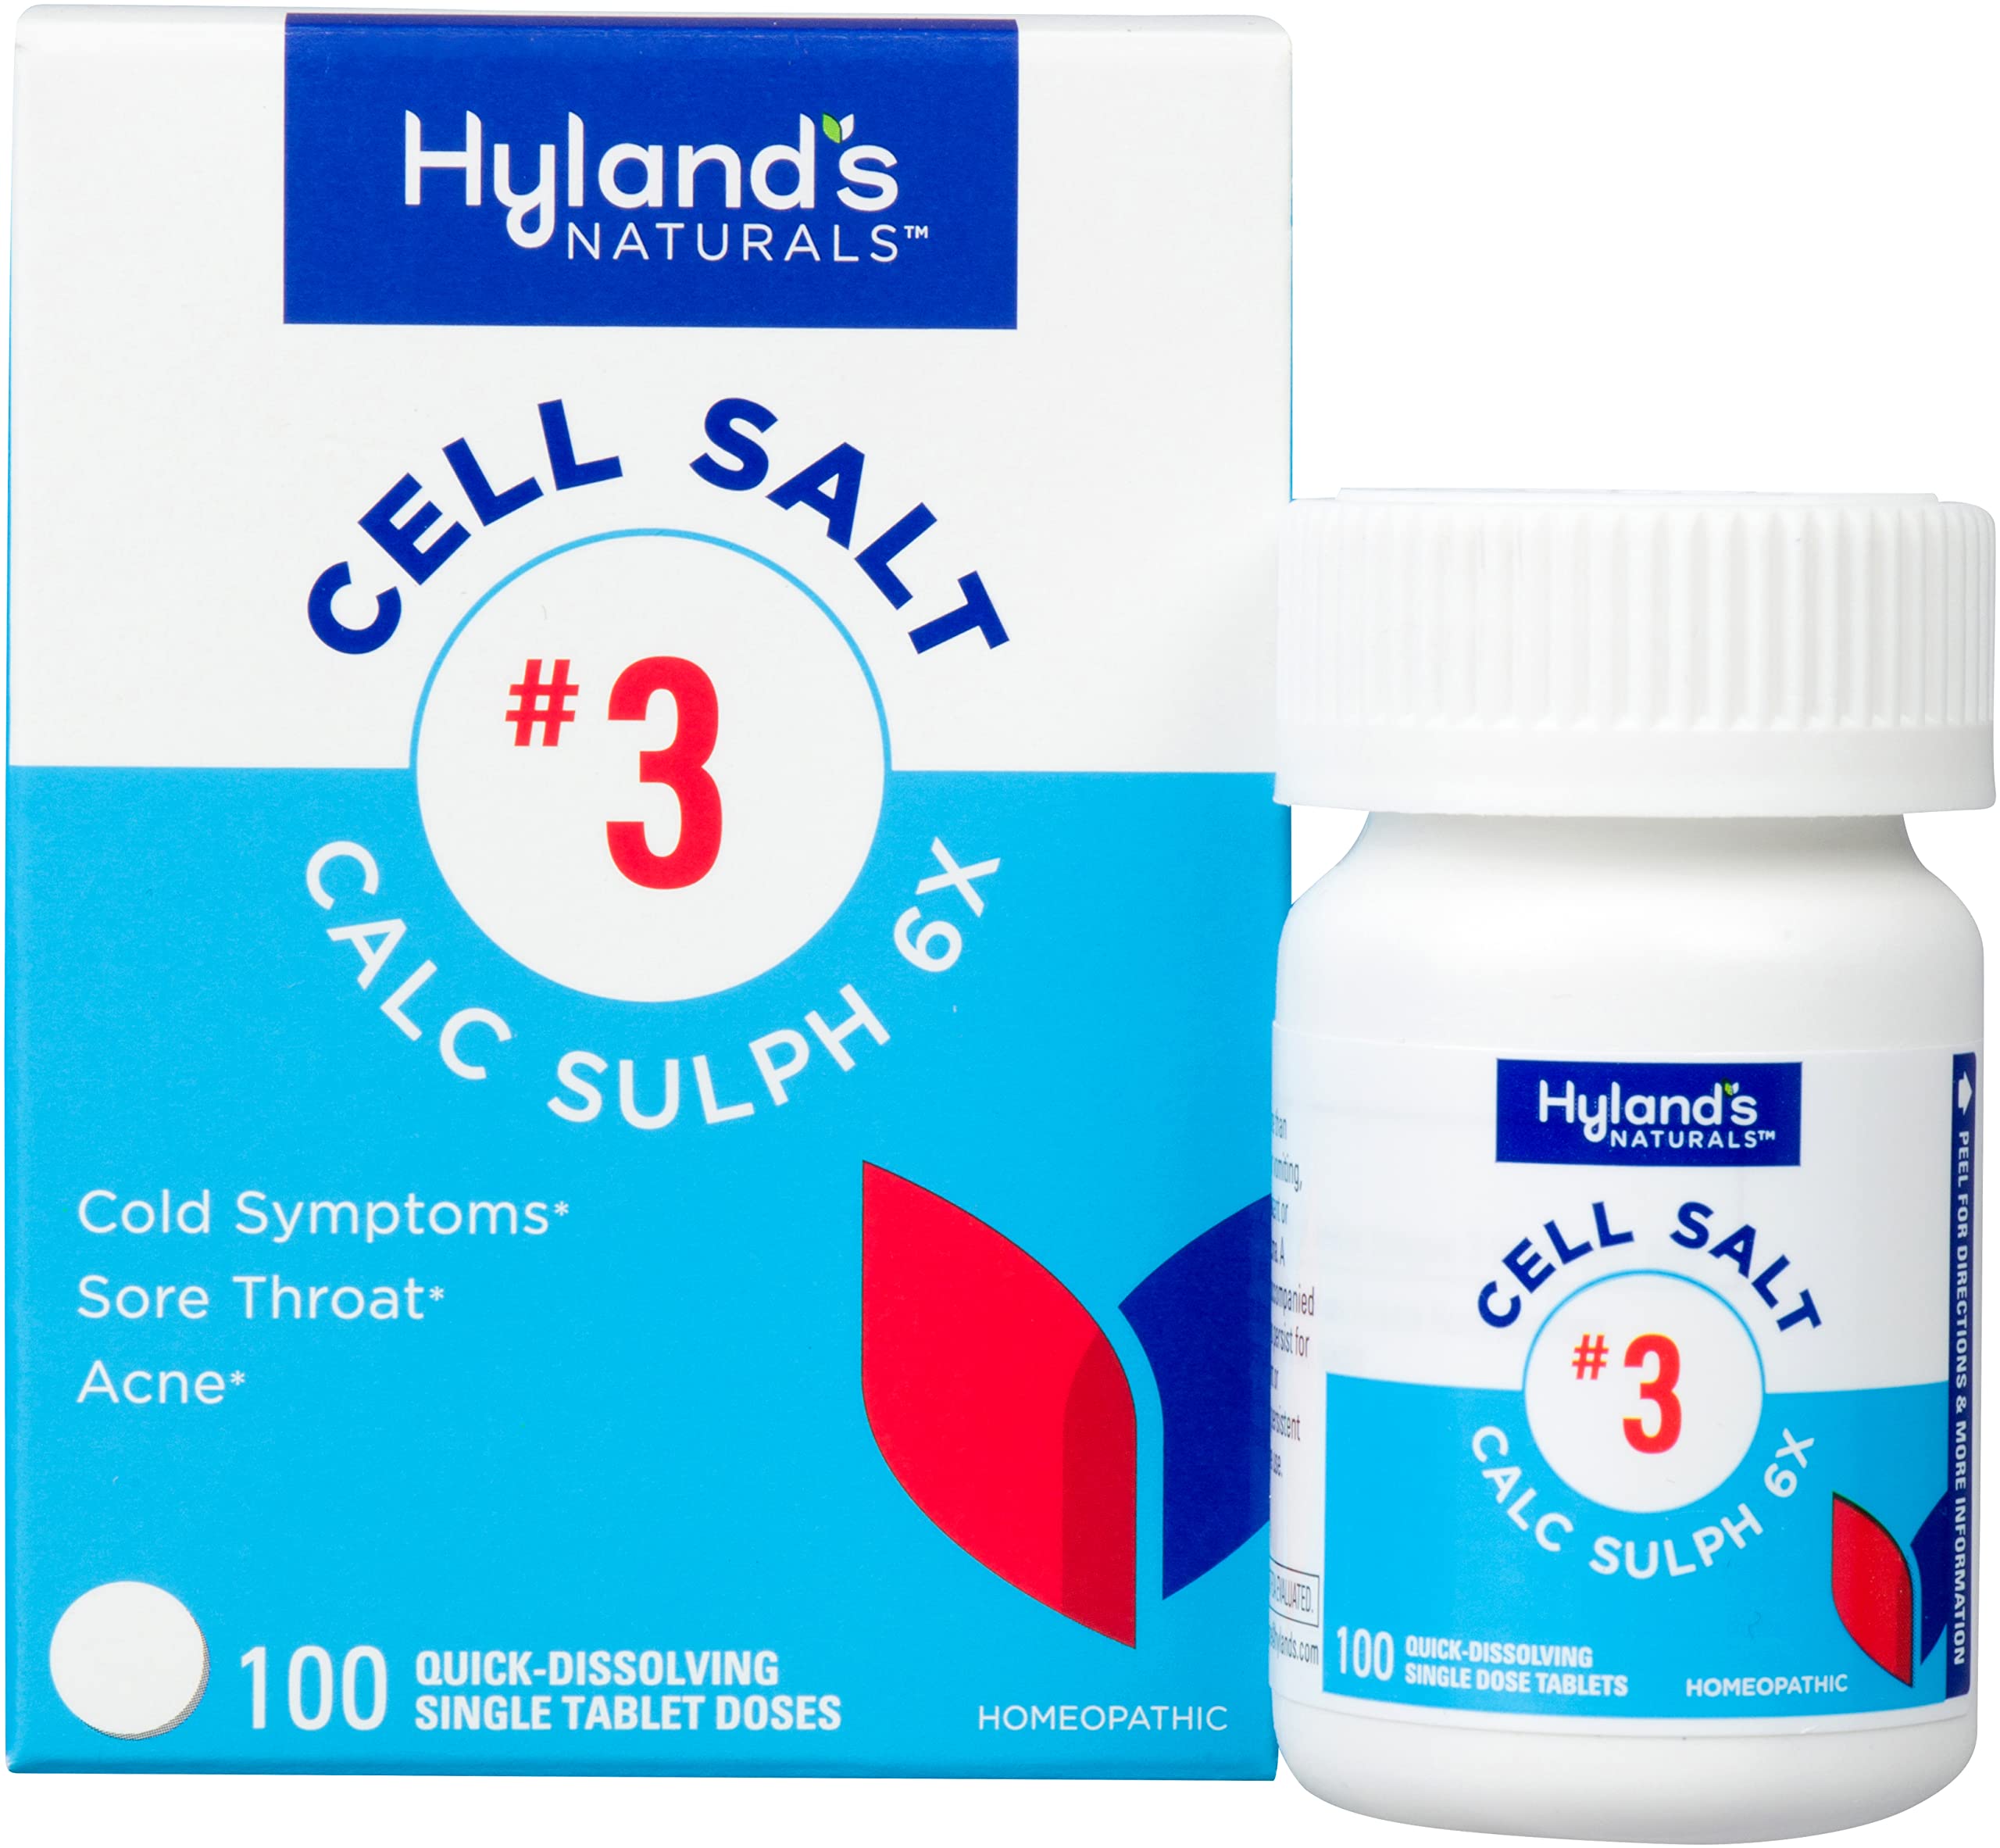 Hyland’s Naturals Cell Salt No. 3 Calc Sulph 6X Tablets, Cold Relief, Natural Homeopathic Relief of Colds, Sore Throat, Acne, Quick Dissolving Tablets, 100 Count